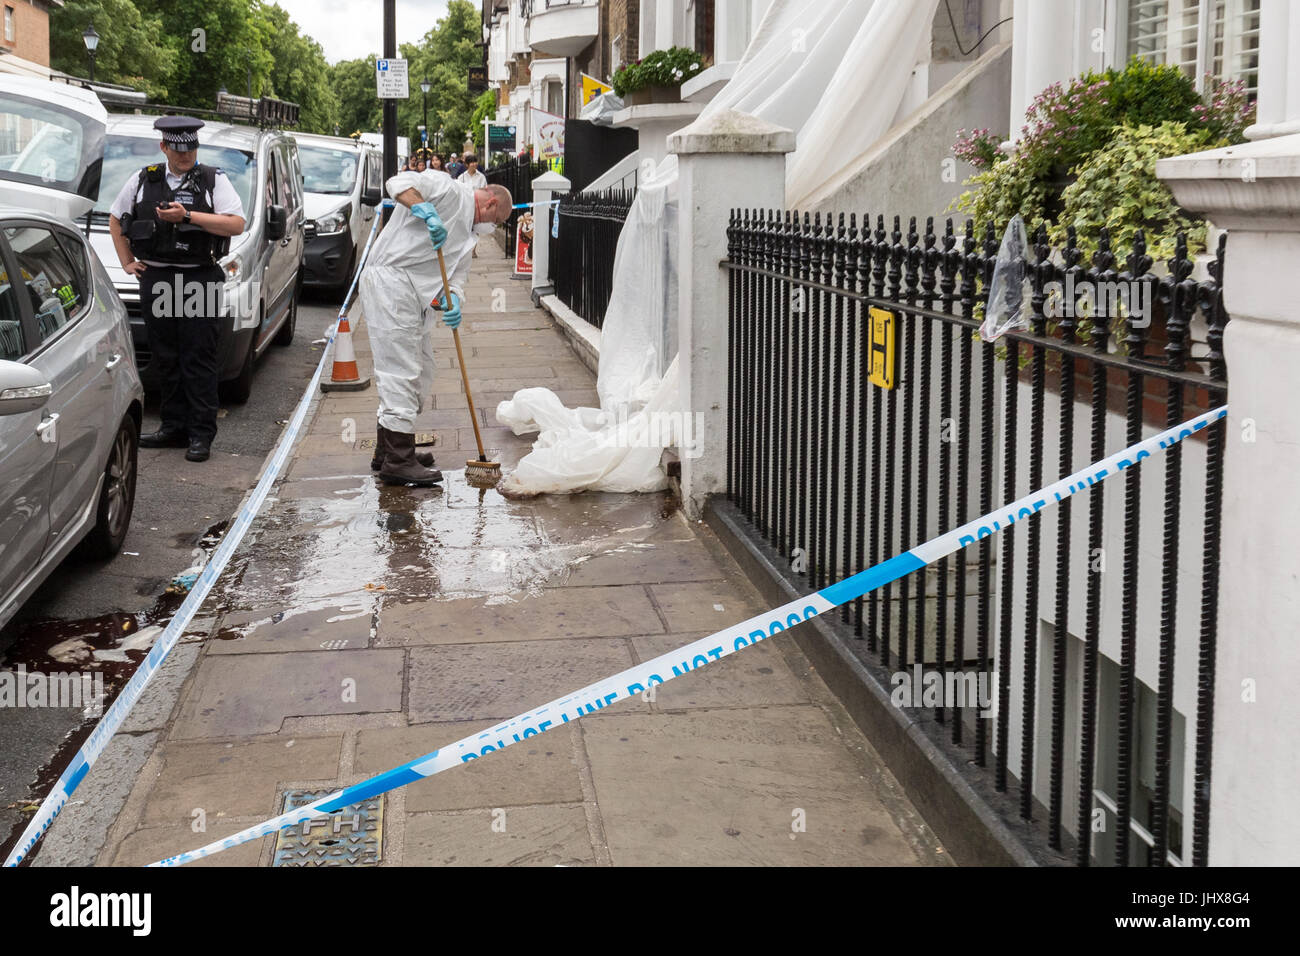 London, UK. 16th July, 2017. Greenwich murder investigation. Police forensic teams clean up after investigations at the scene of the crime. Danny Pearce, 31, was stabbed to death by two men on a moped near Greenwich Park in the early hours of Saturday who ordered him to hand over his mobile phone. The victim was fatally wounded during a clash in which shots were also fired the Metropolitan Police have said.© Guy Corbishley/Alamy Live News Stock Photo